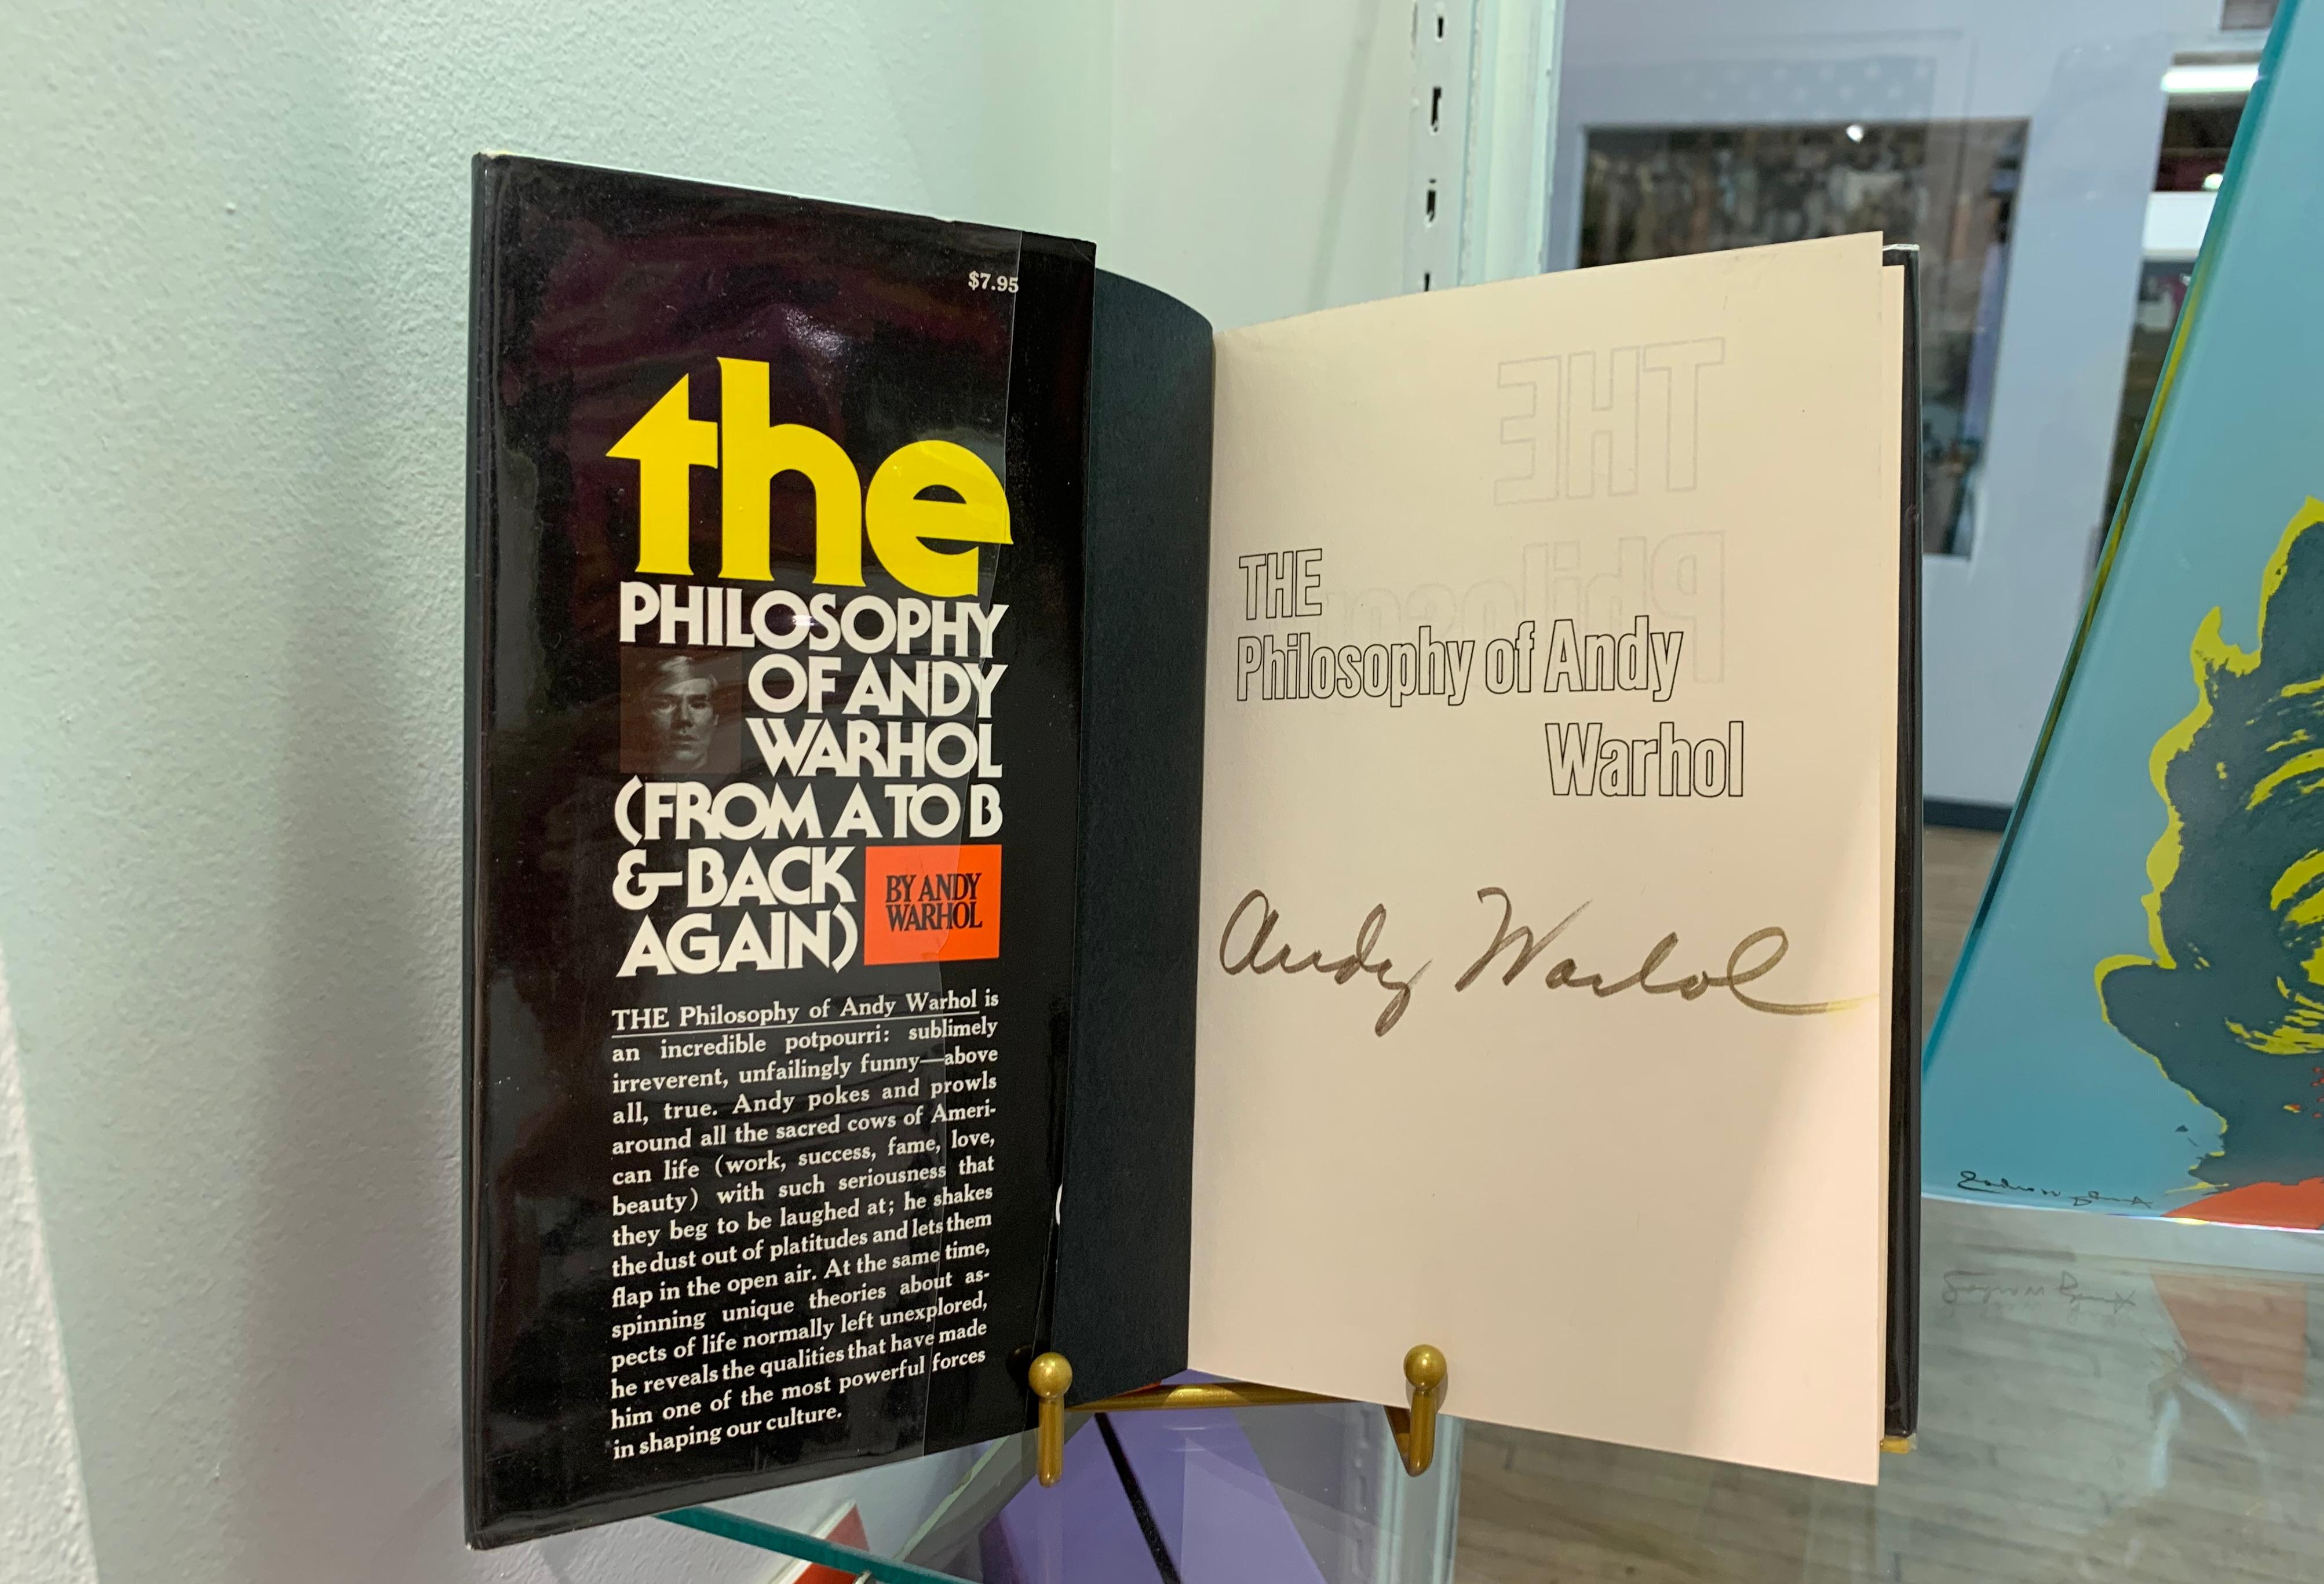 The Philosophy of Andy Warhol (Hand Signed by Andy Warhol)